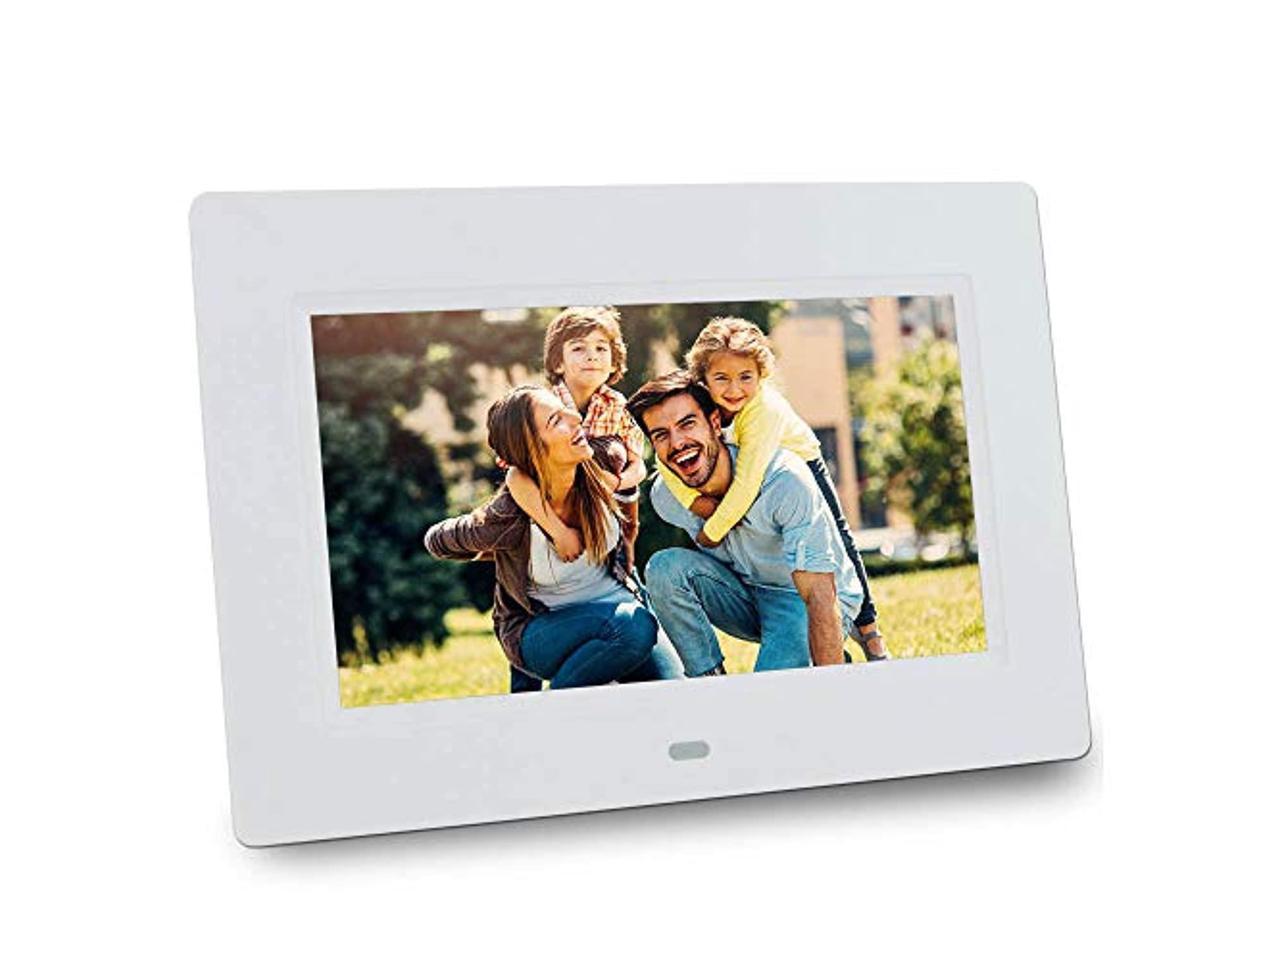 Remote Control Auto Rotate Digital Picture Frame with 1080P Video 7 Inch Black Music Slide Show Time,1280x800 16:9 Digital Photo Frame with IPS Screen Photo Calendar 